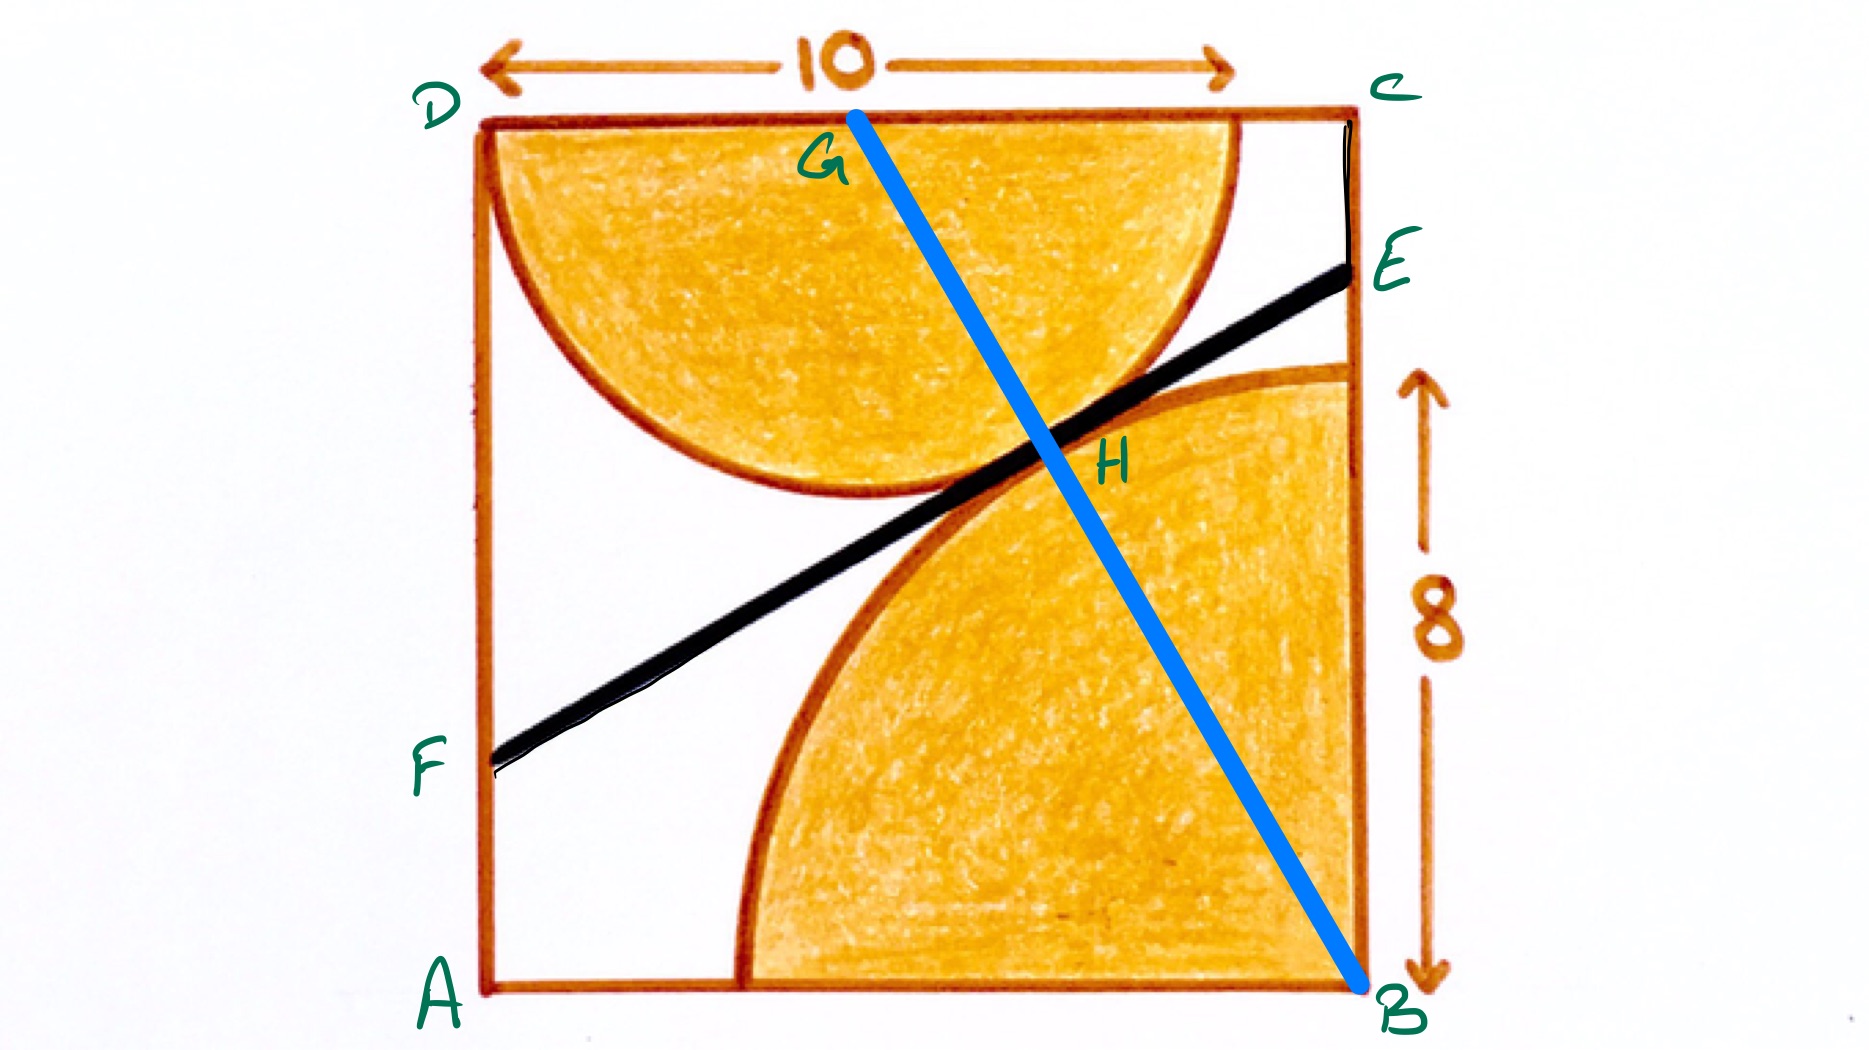 Semi-circle and quarter circle in a square labelled